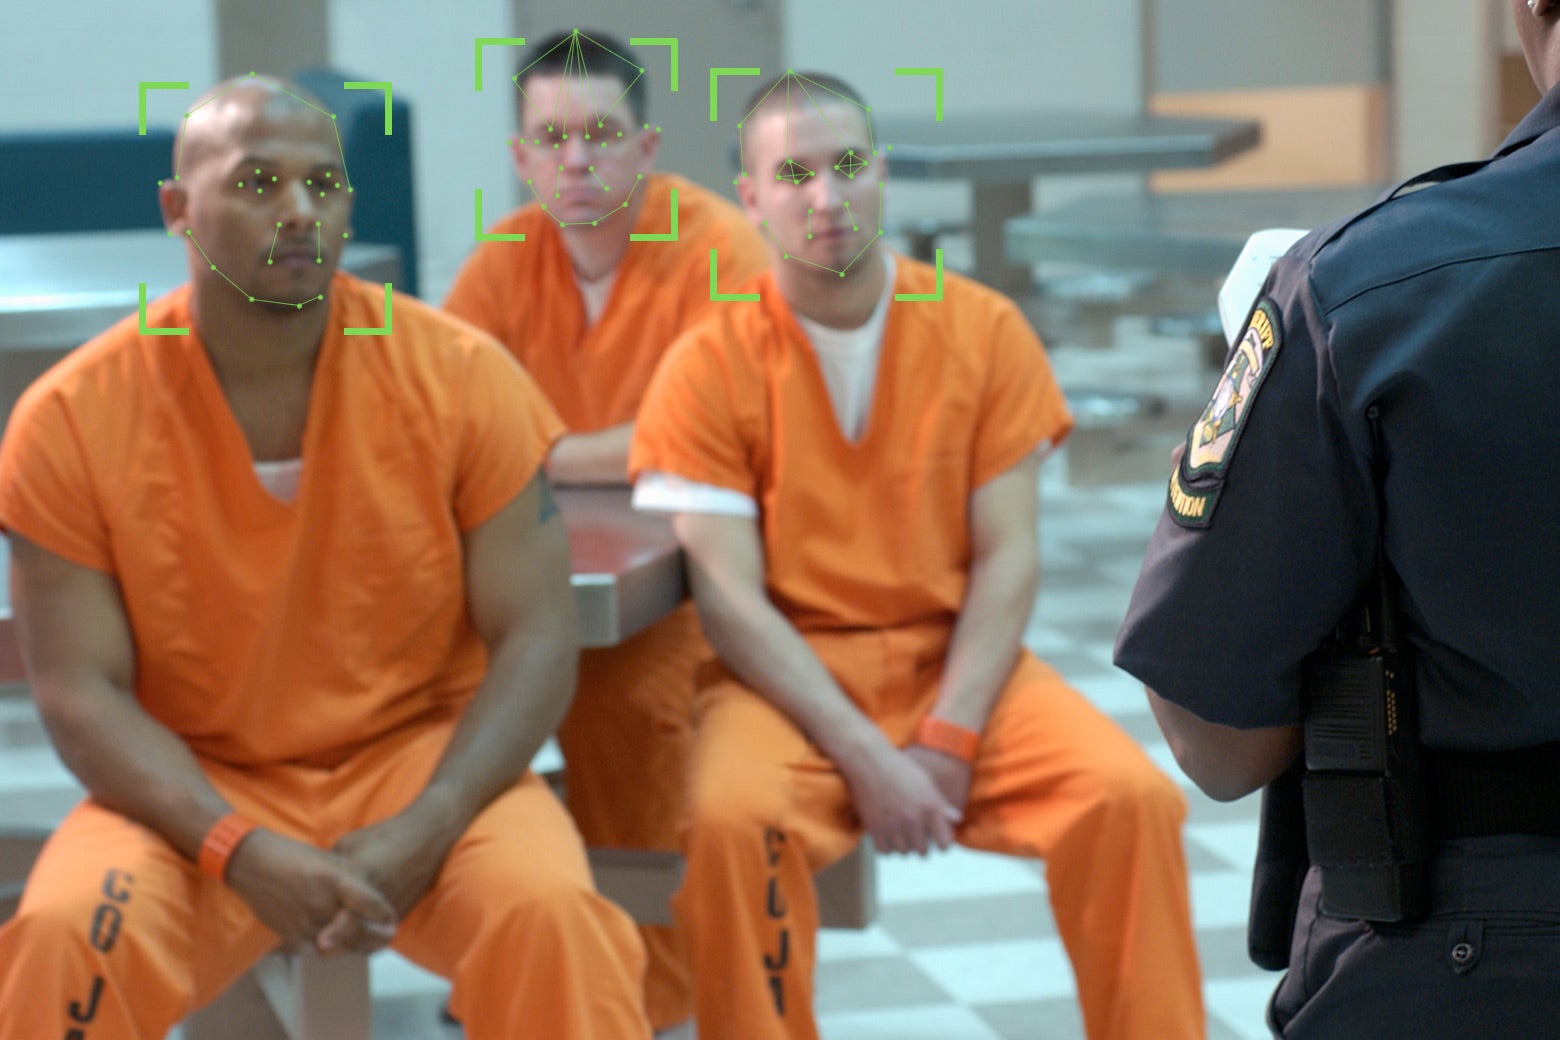 Inmates with facial recognition technology lines on their faces.